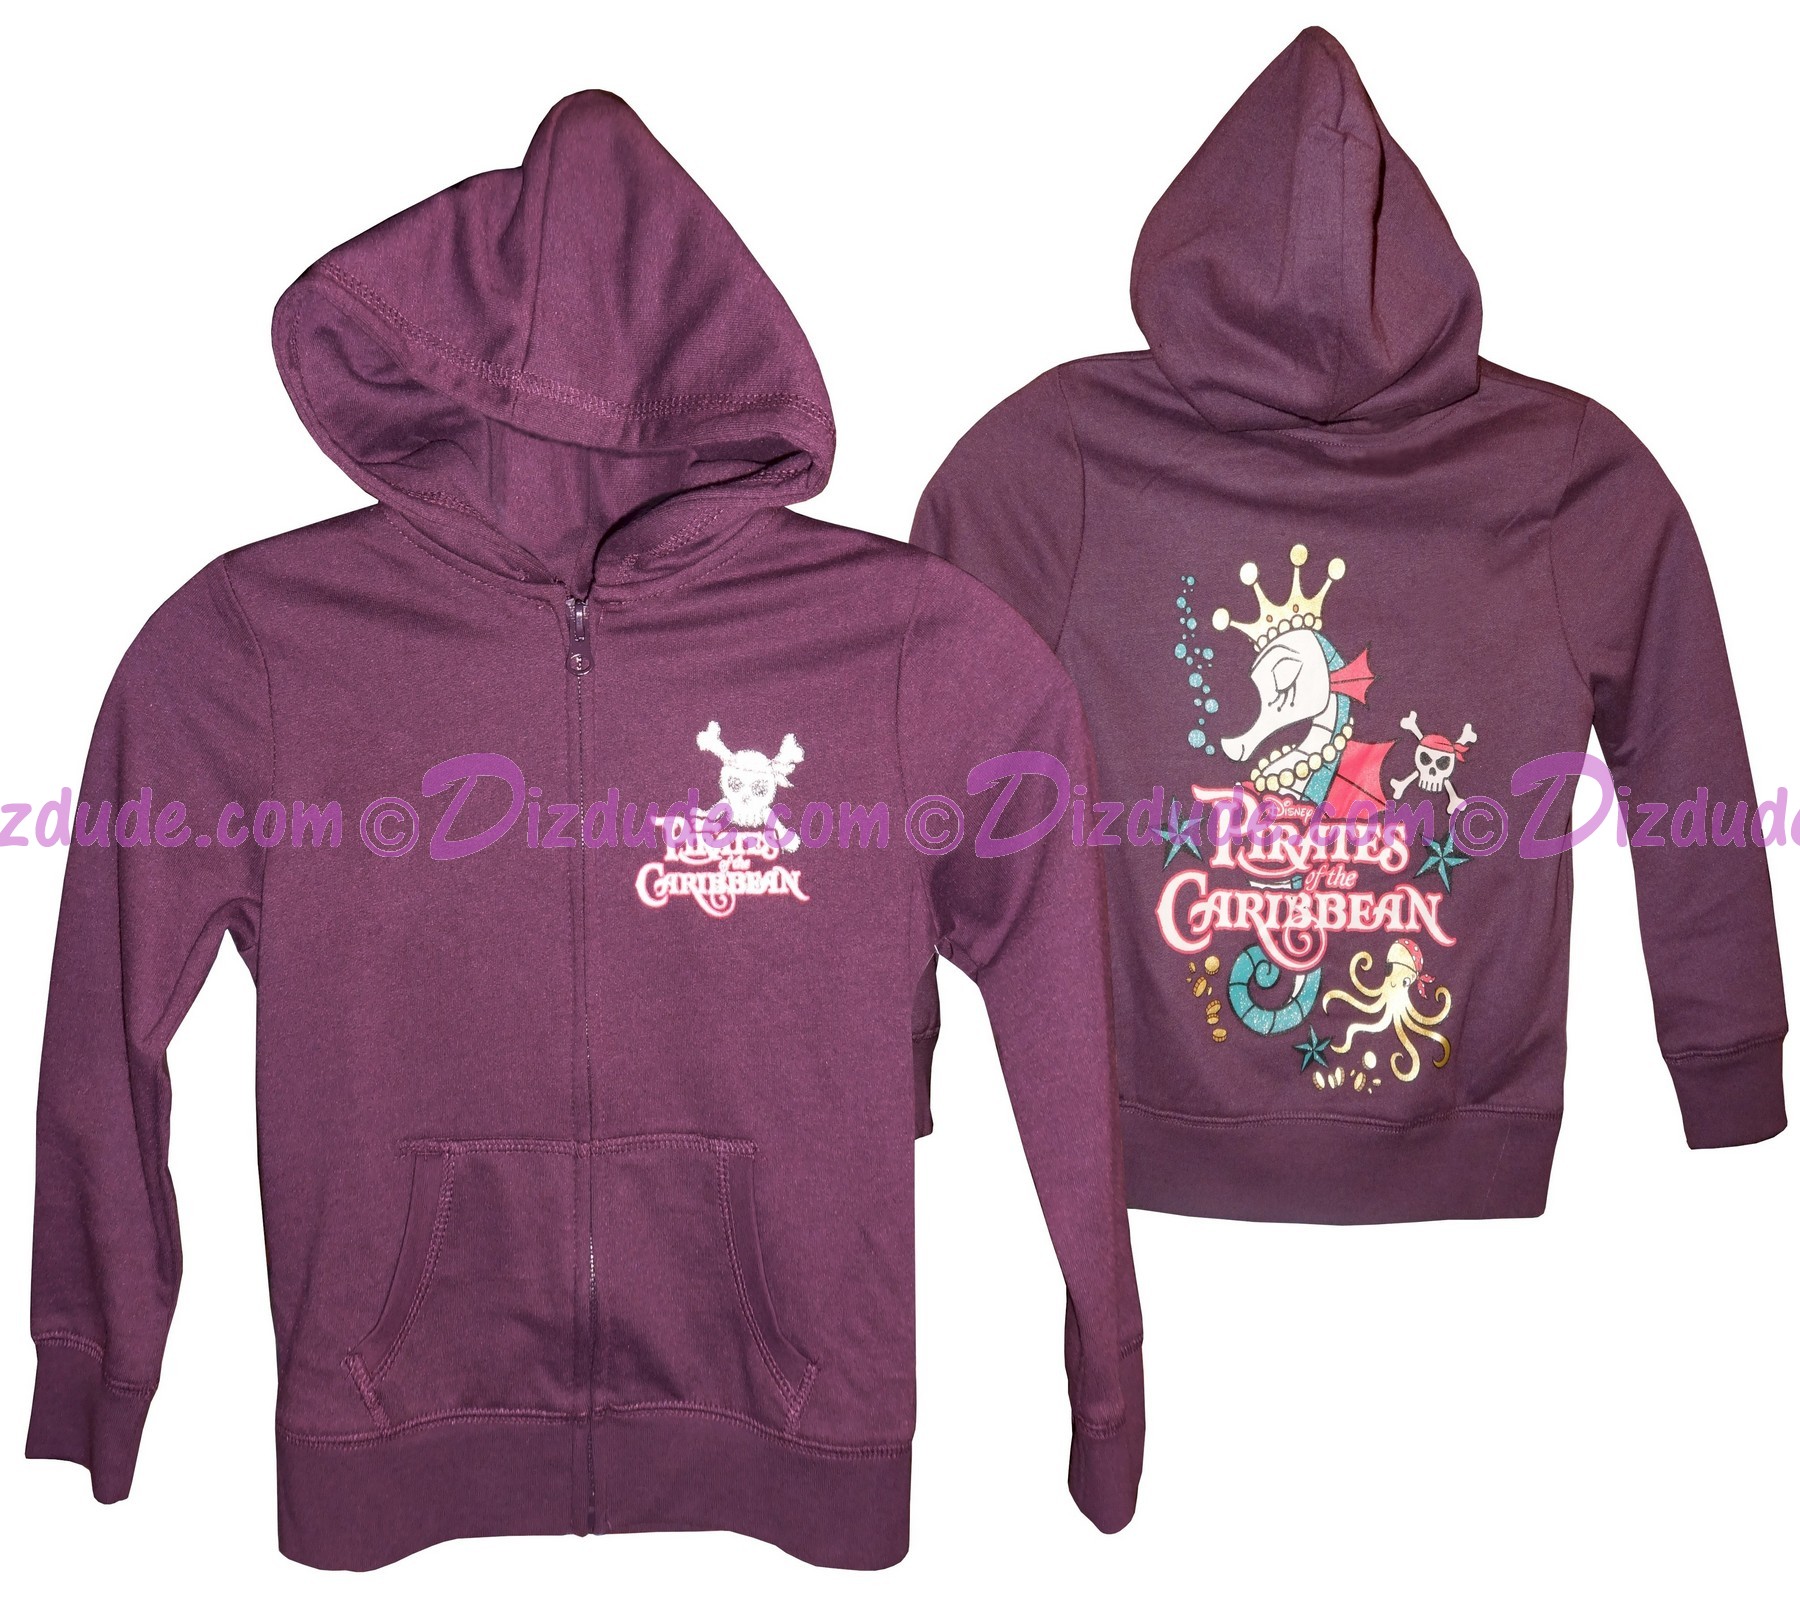 (SOLD OUT) Disney's Pirates of the Caribbean - Pirate Princess Youth Hoodie (Printed Front & Back)